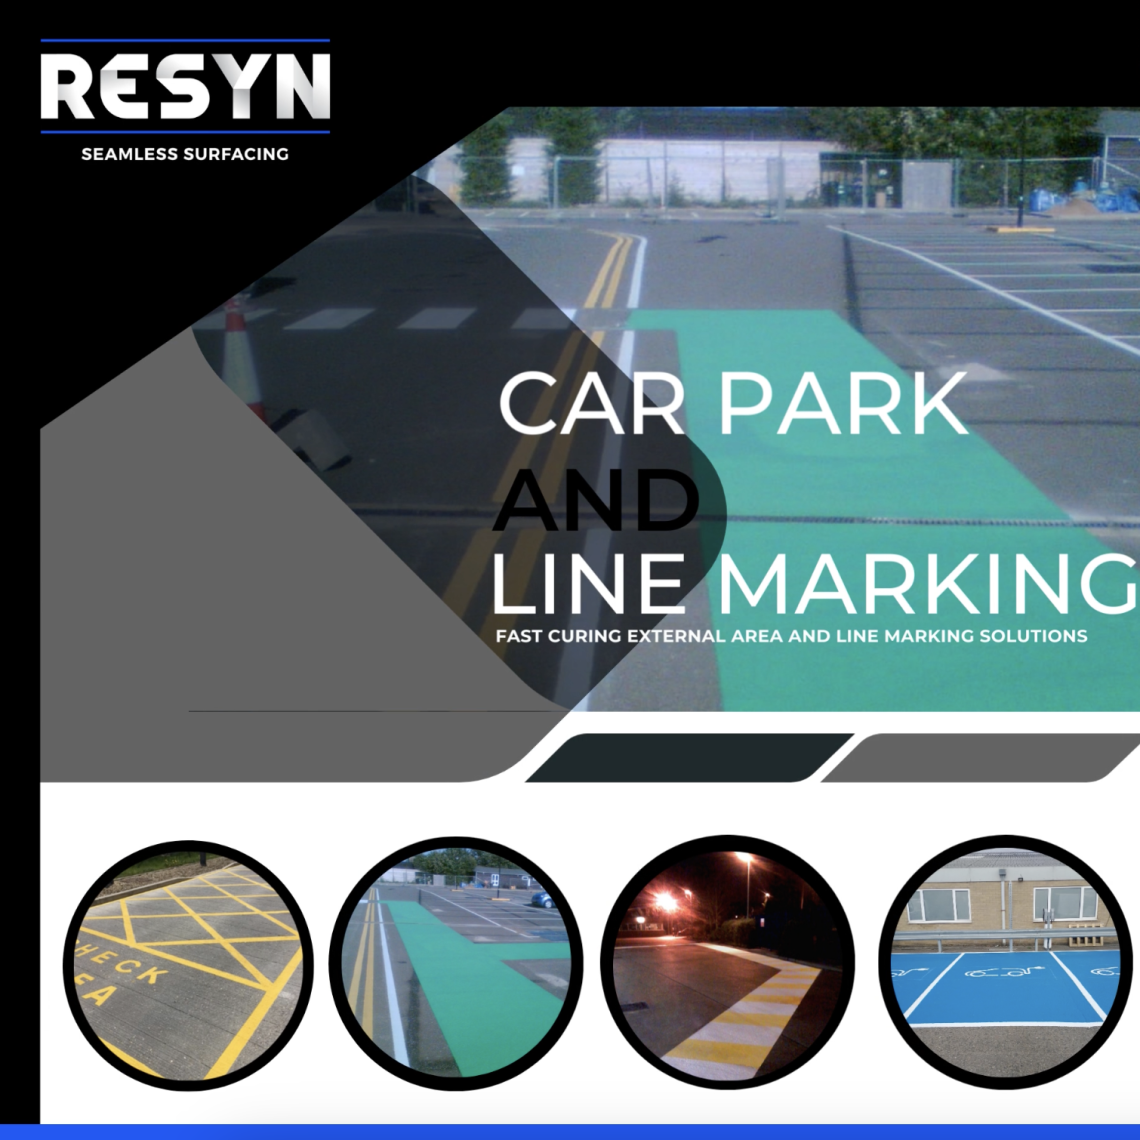 Car park flooring is often the first point customers see; therefore, creating the right impression with high safety standards is crucial